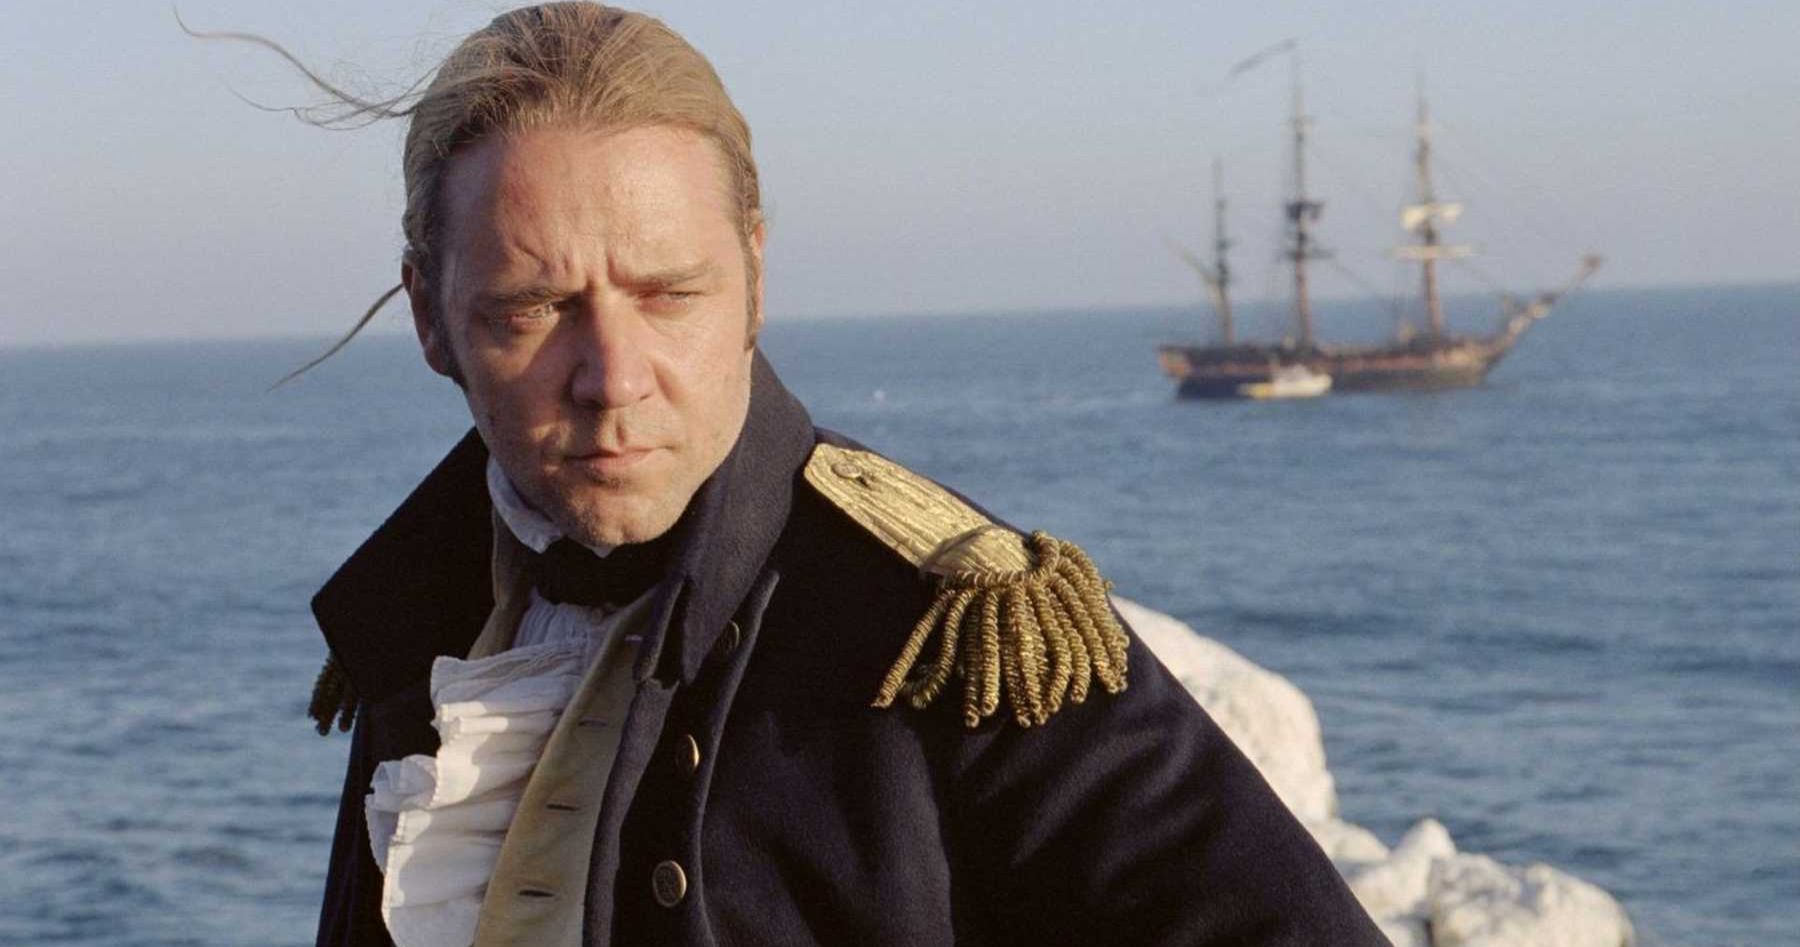 Russell Crowe Strikes Down Master and Commander Critic with Just One Tweet